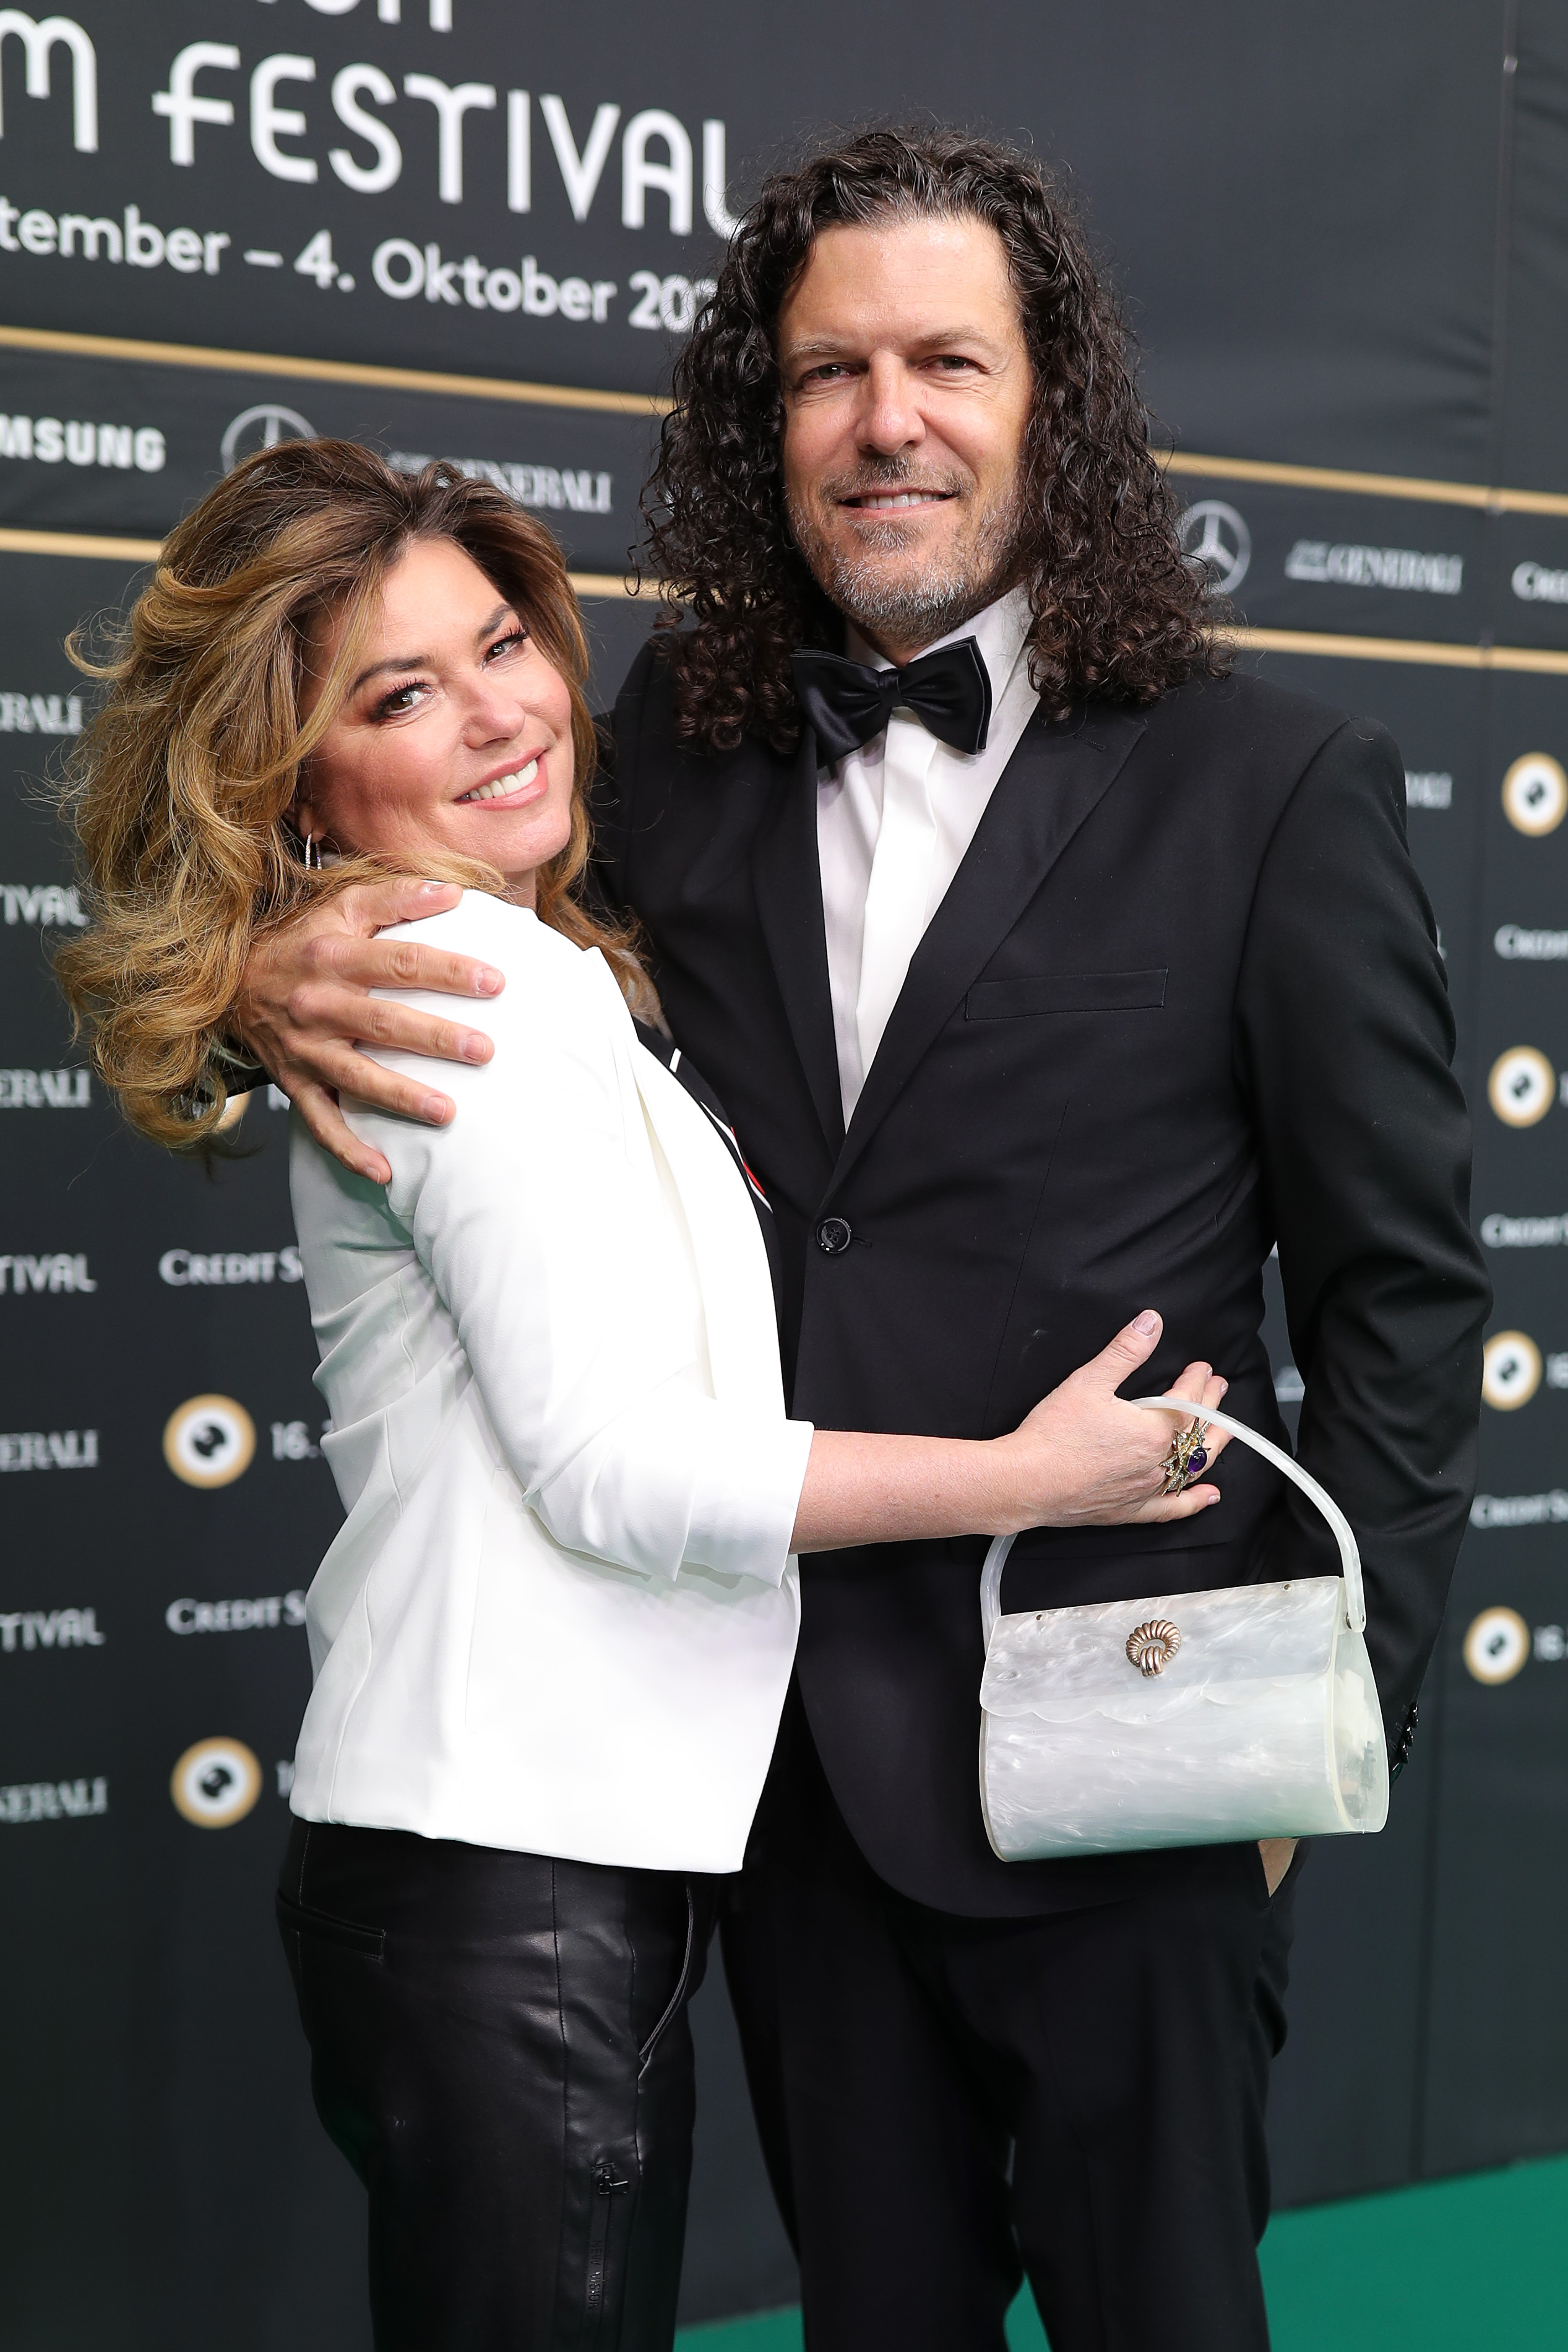 Shania Twain and her husband, Frederic Thiebaud during the 16th Zurich Film Festival on September 26, 2020, in Zurich, Switzerland | Source: Getty Images